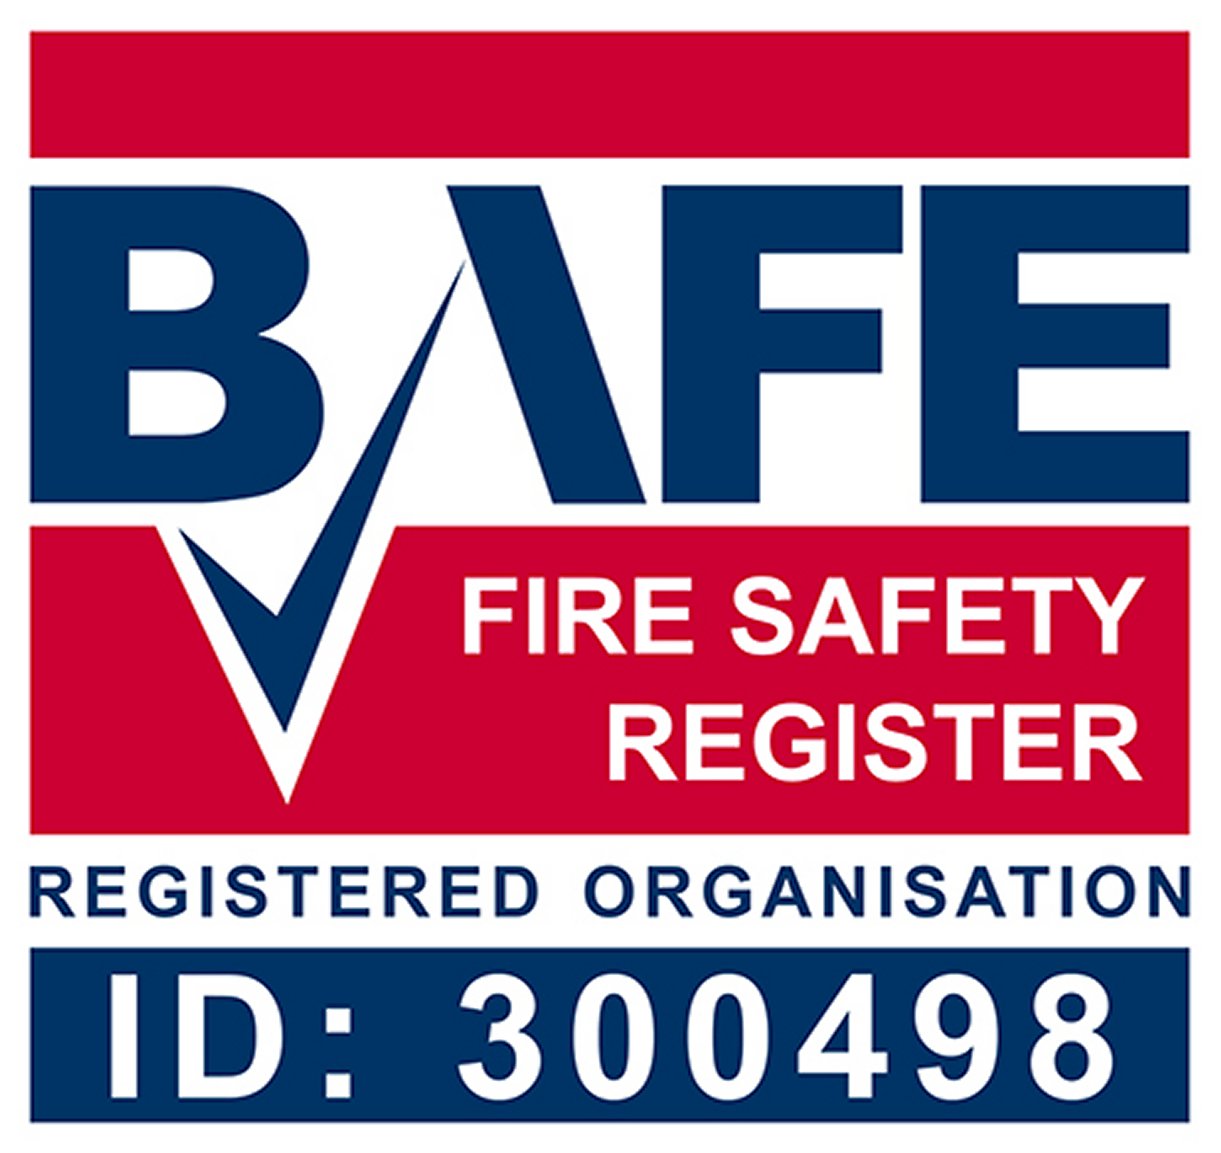 Holman Security Systems the West Midlands BAFE Certified